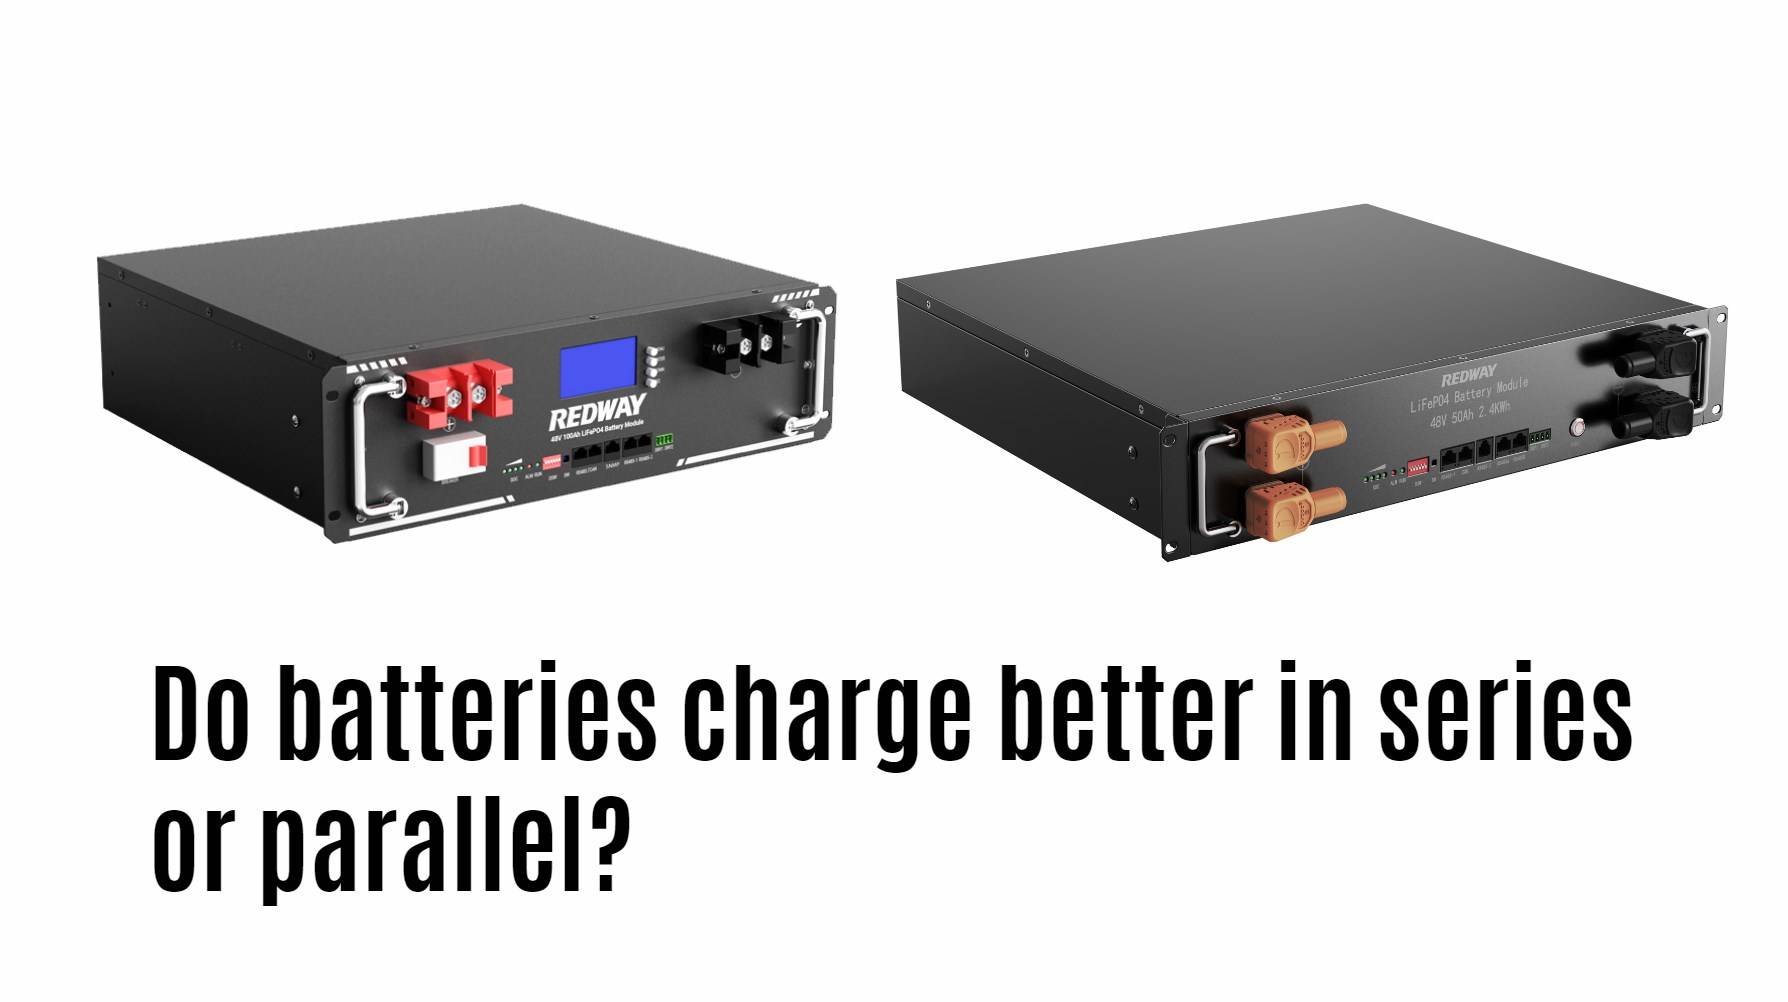 Do batteries charge better in series or parallel? server rack battery manfacturer factory oem odm redway